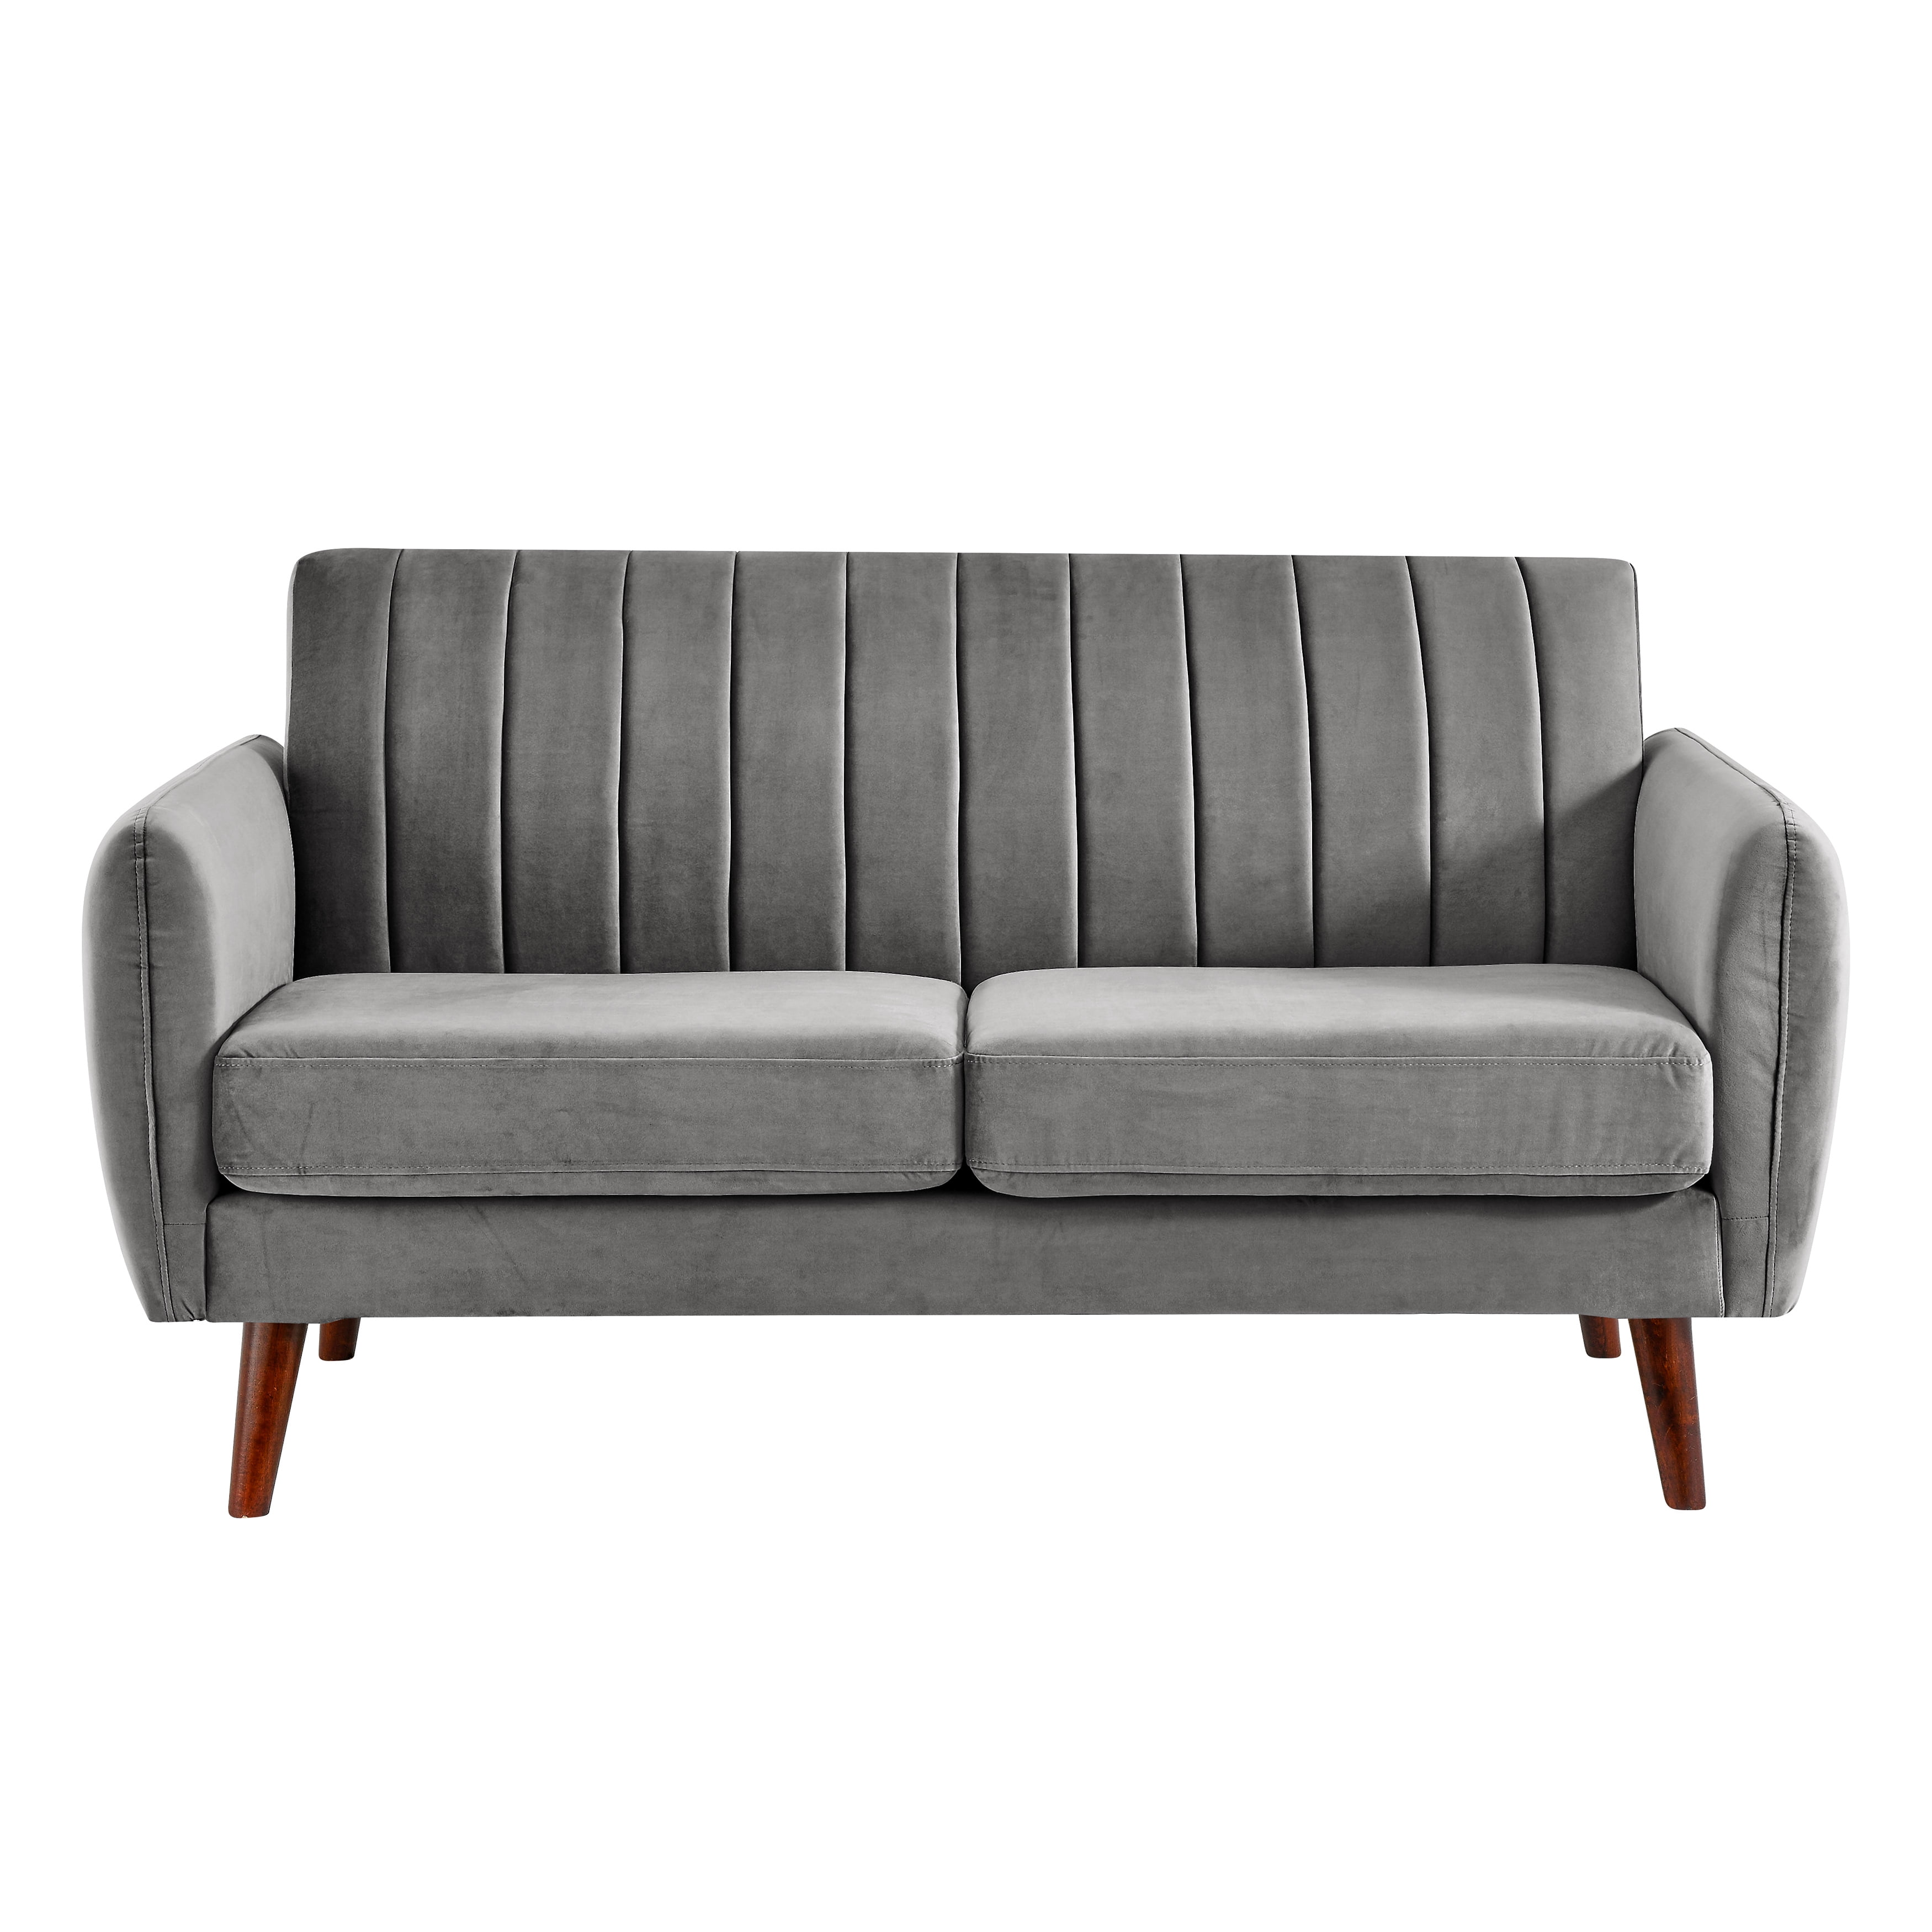 Room Sofa In Grey Flannel